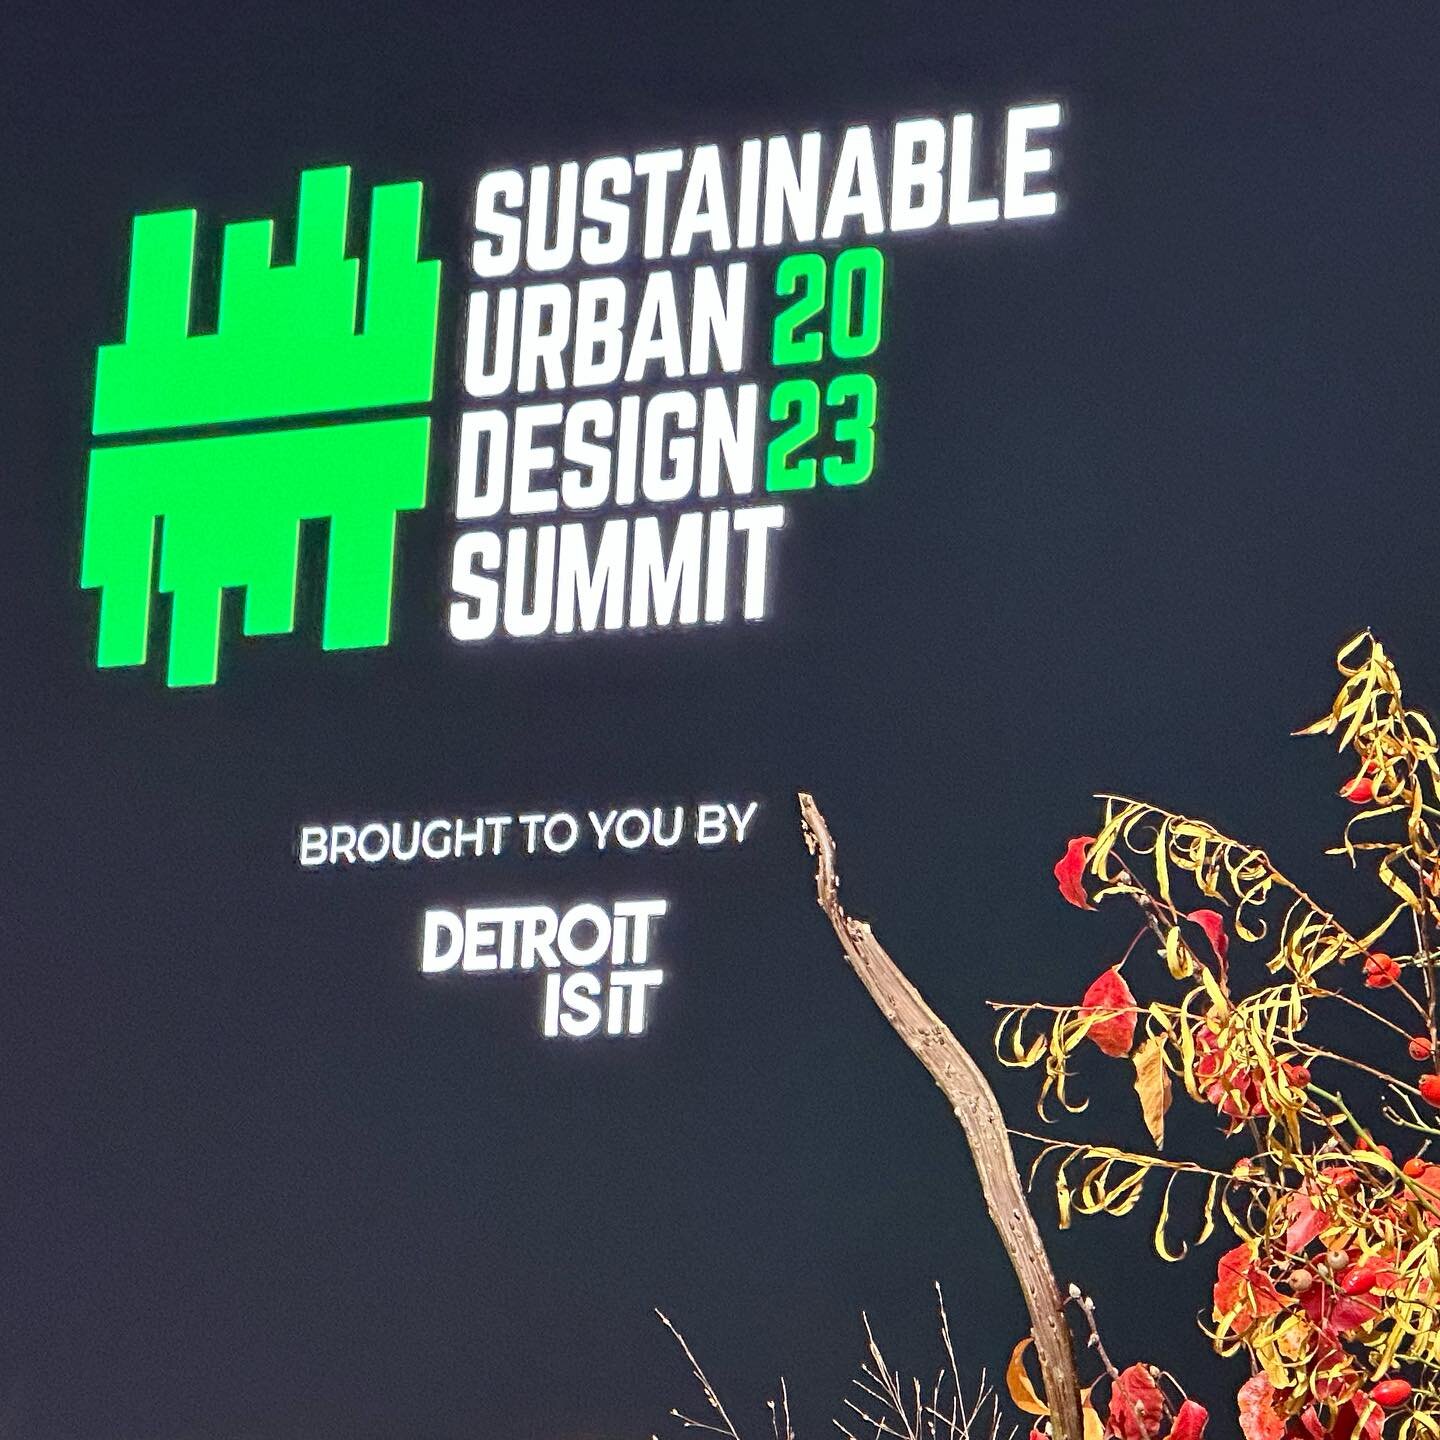 BLD is enjoying the Sustainable Urban Design Summit in Detroit #suds2023